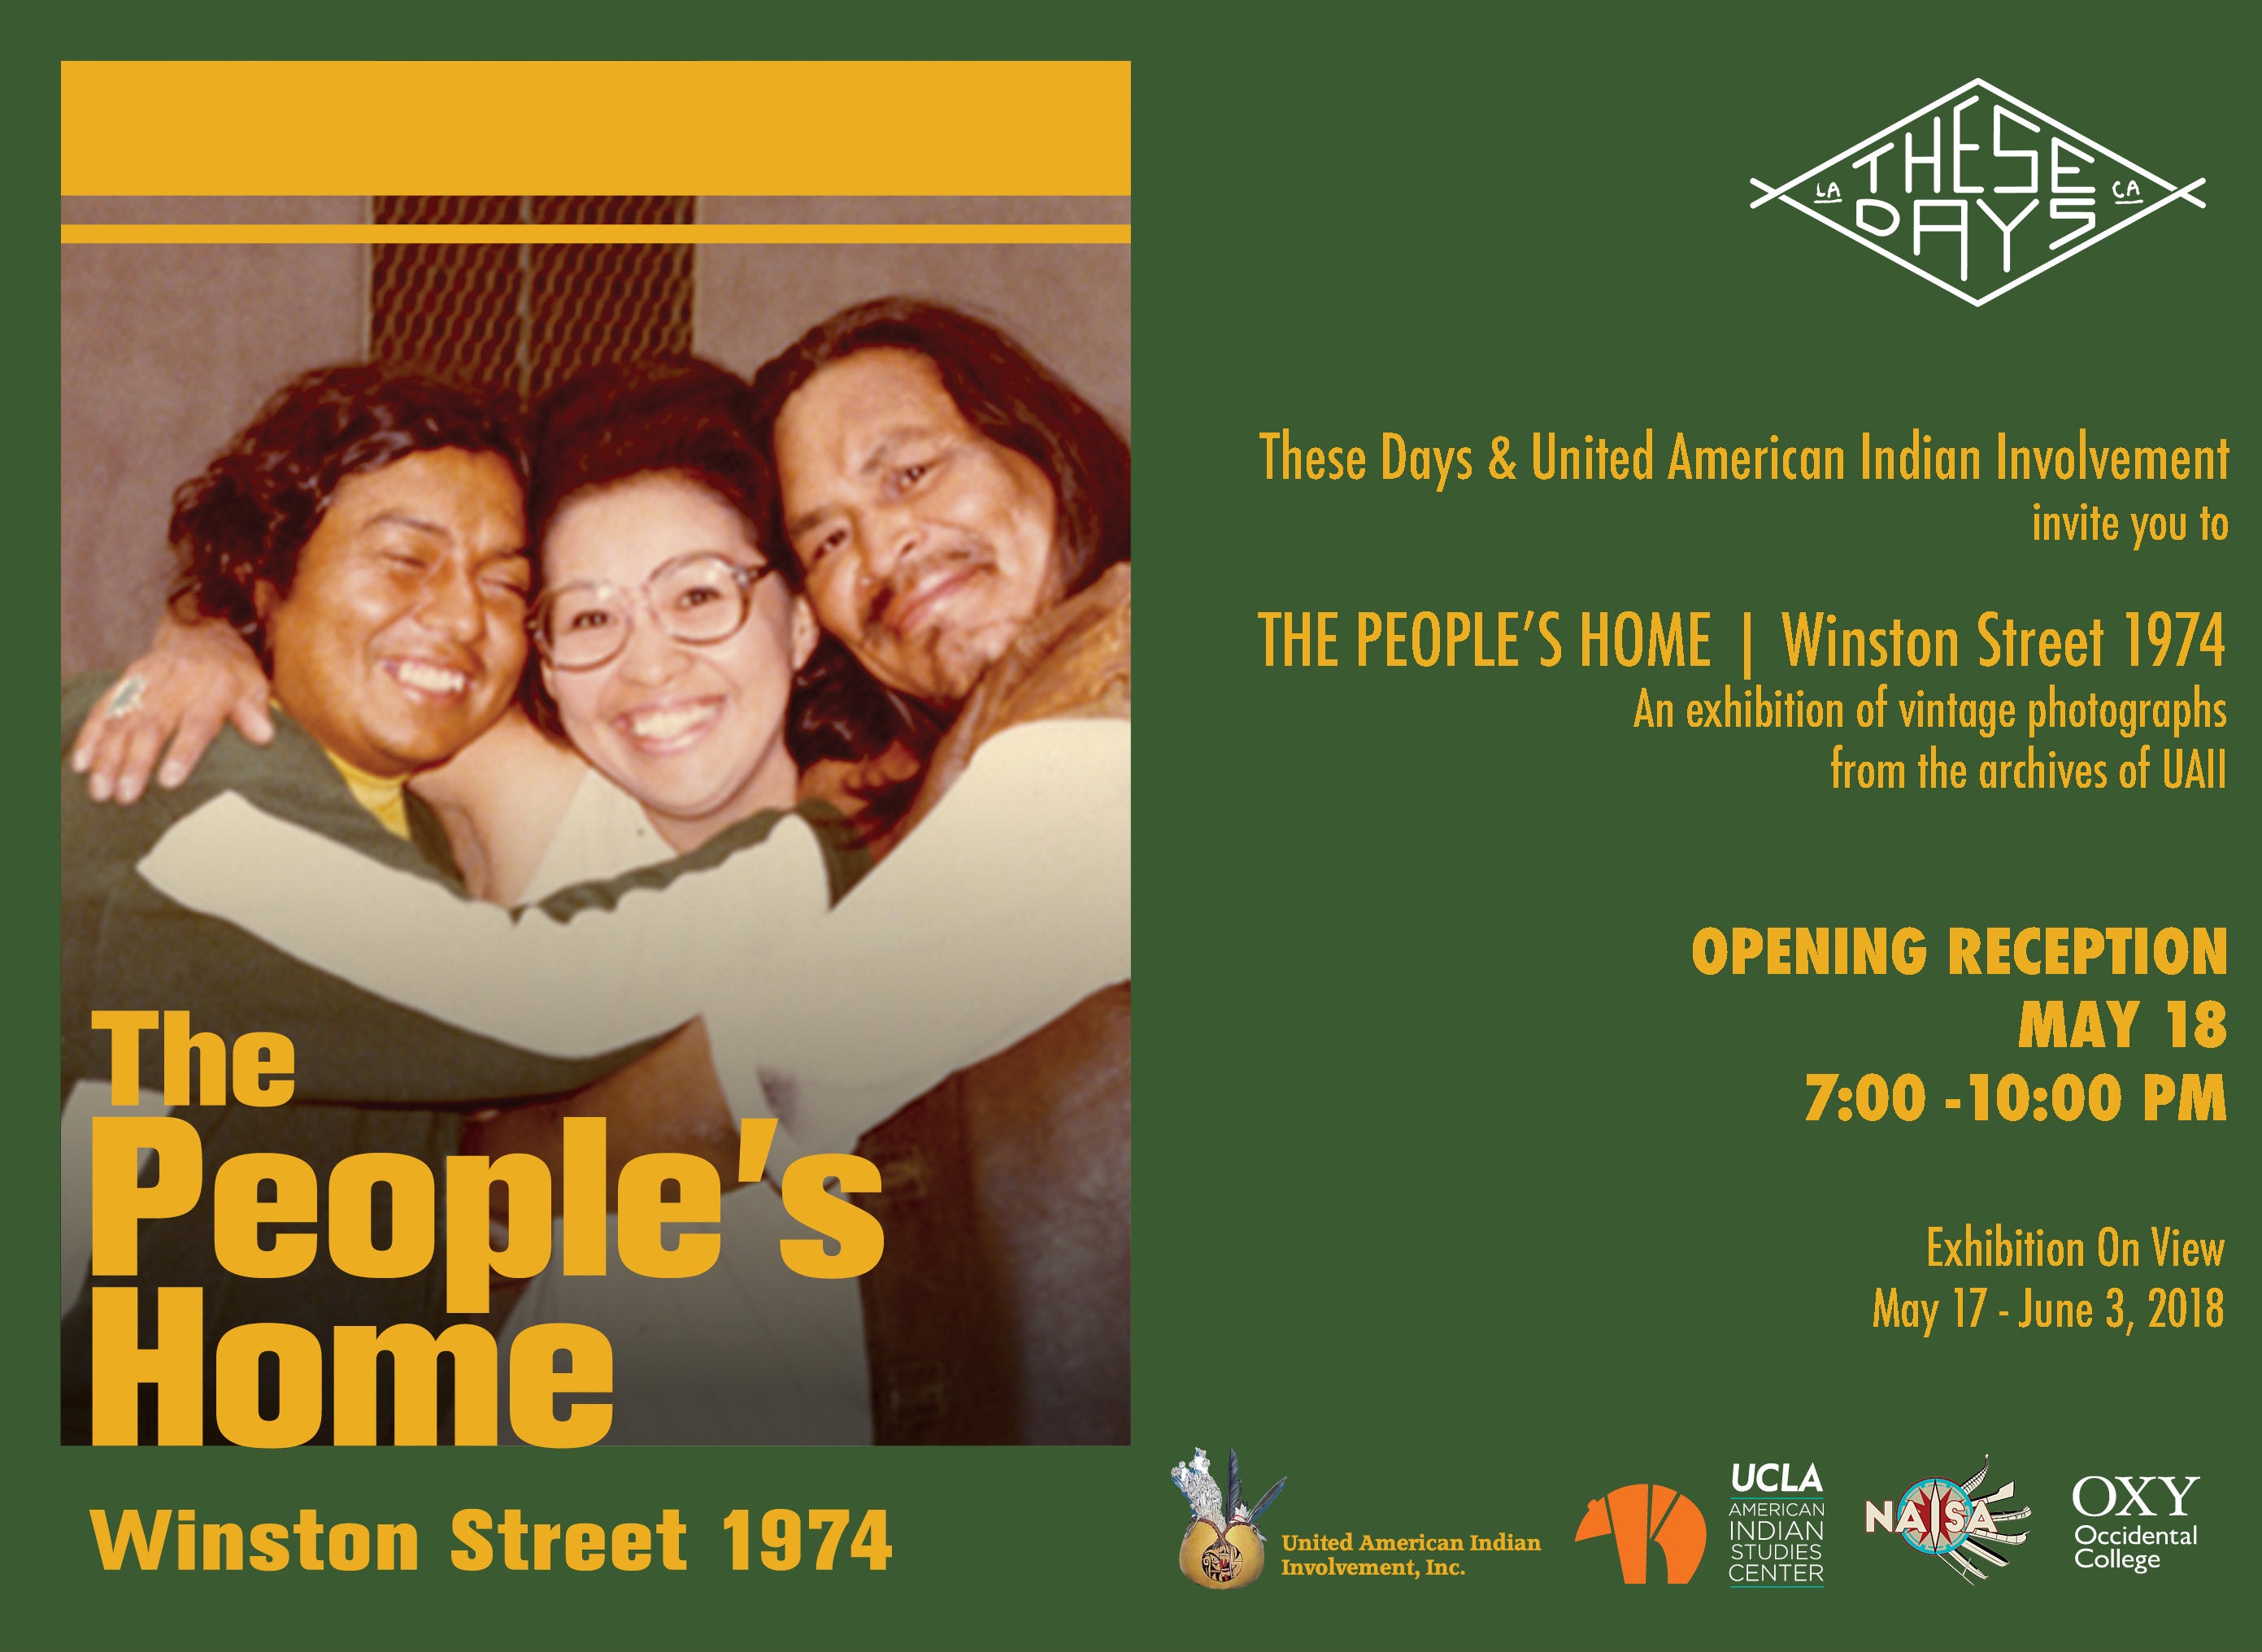 THE PEOPLE'S HOME | Winston Street 1974